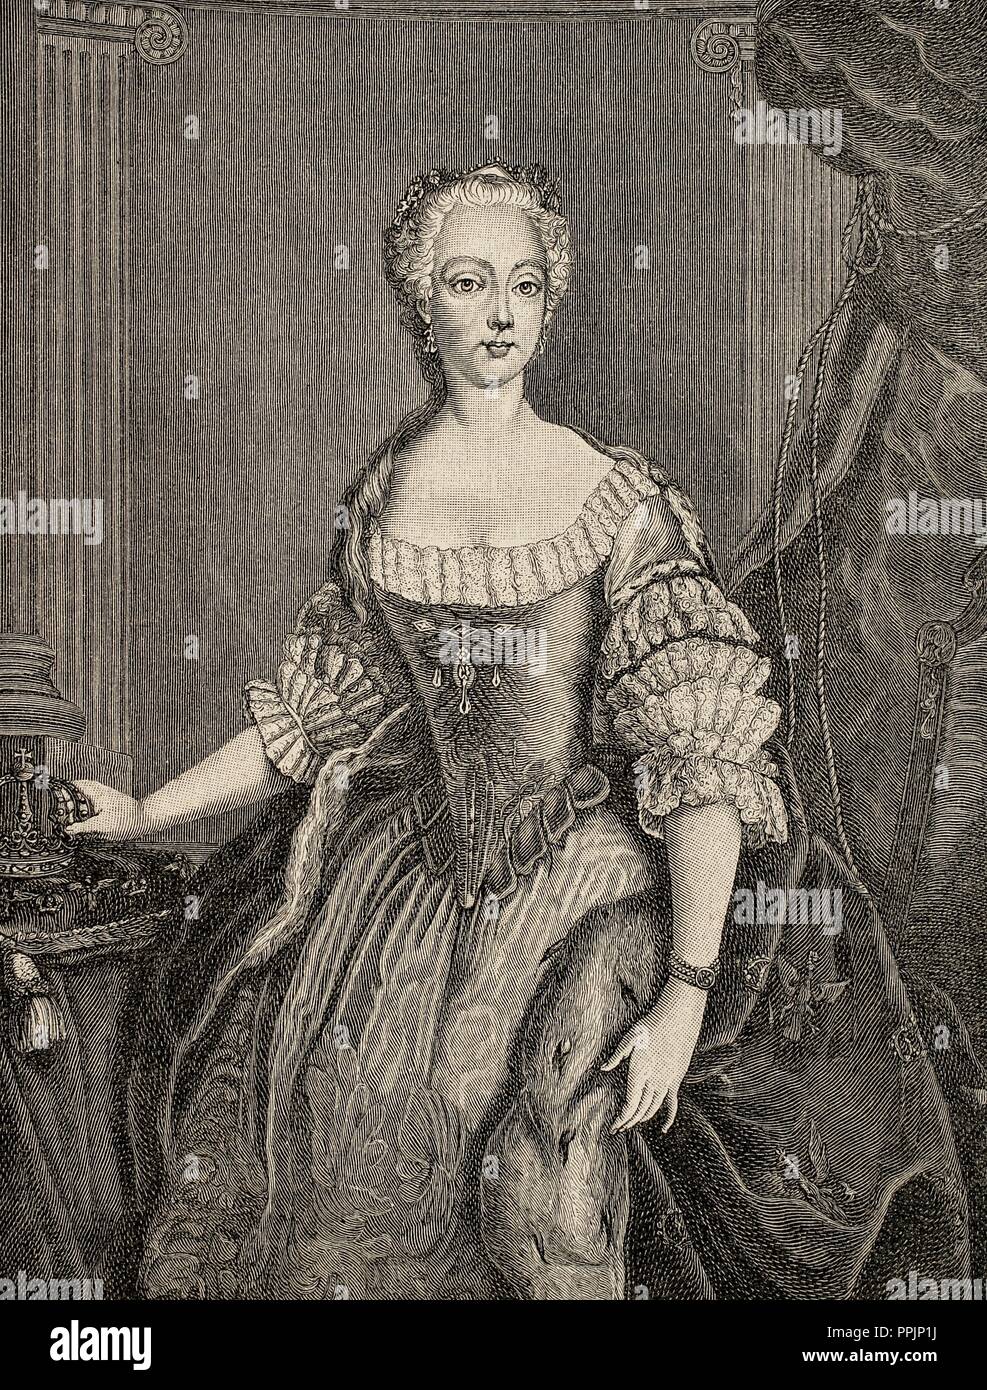 Elisabeth Christine of Brunswick-Wolfenbuttel-Bevern (1715-1797). Queen consort of Prussia, wife of King Frederick II. Stock Photo